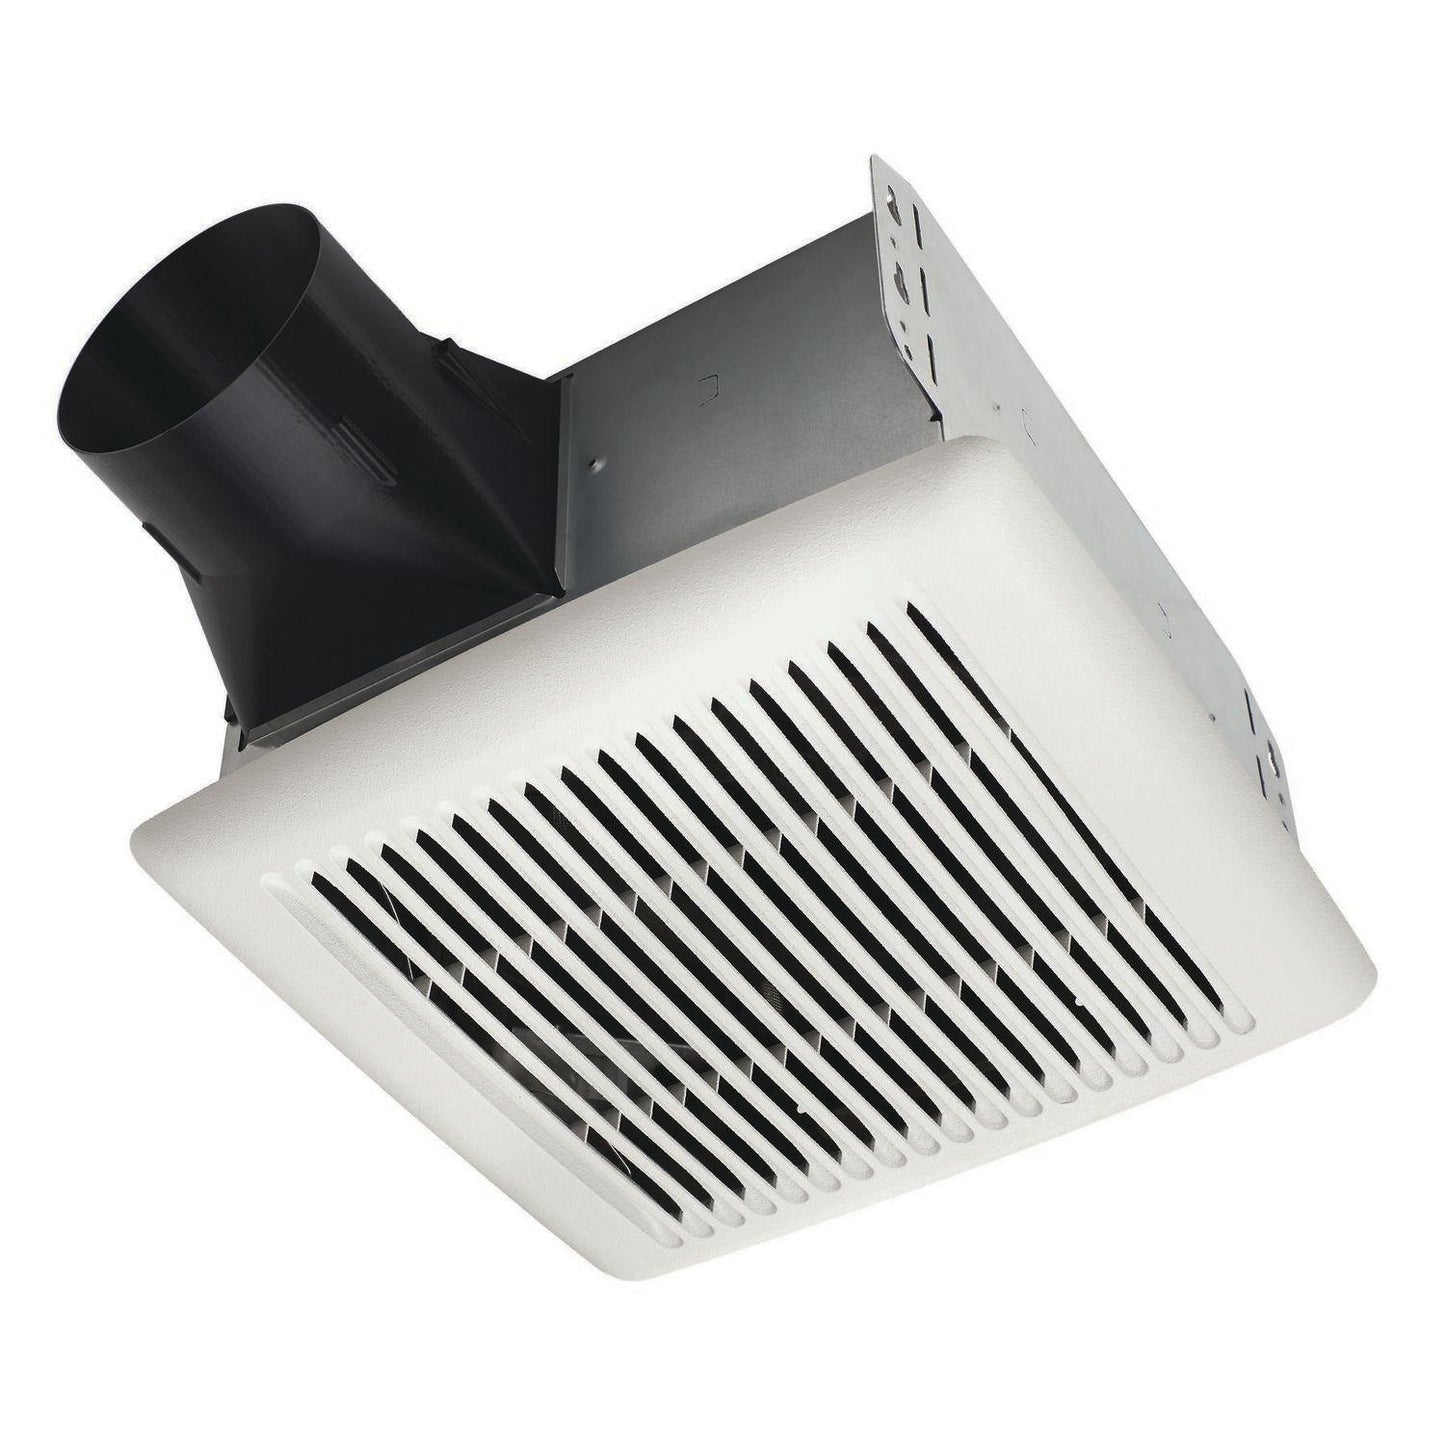 Broan AER50 Broan-Nutone® Wall Vent Kit, 3" Or 4" Round Duct